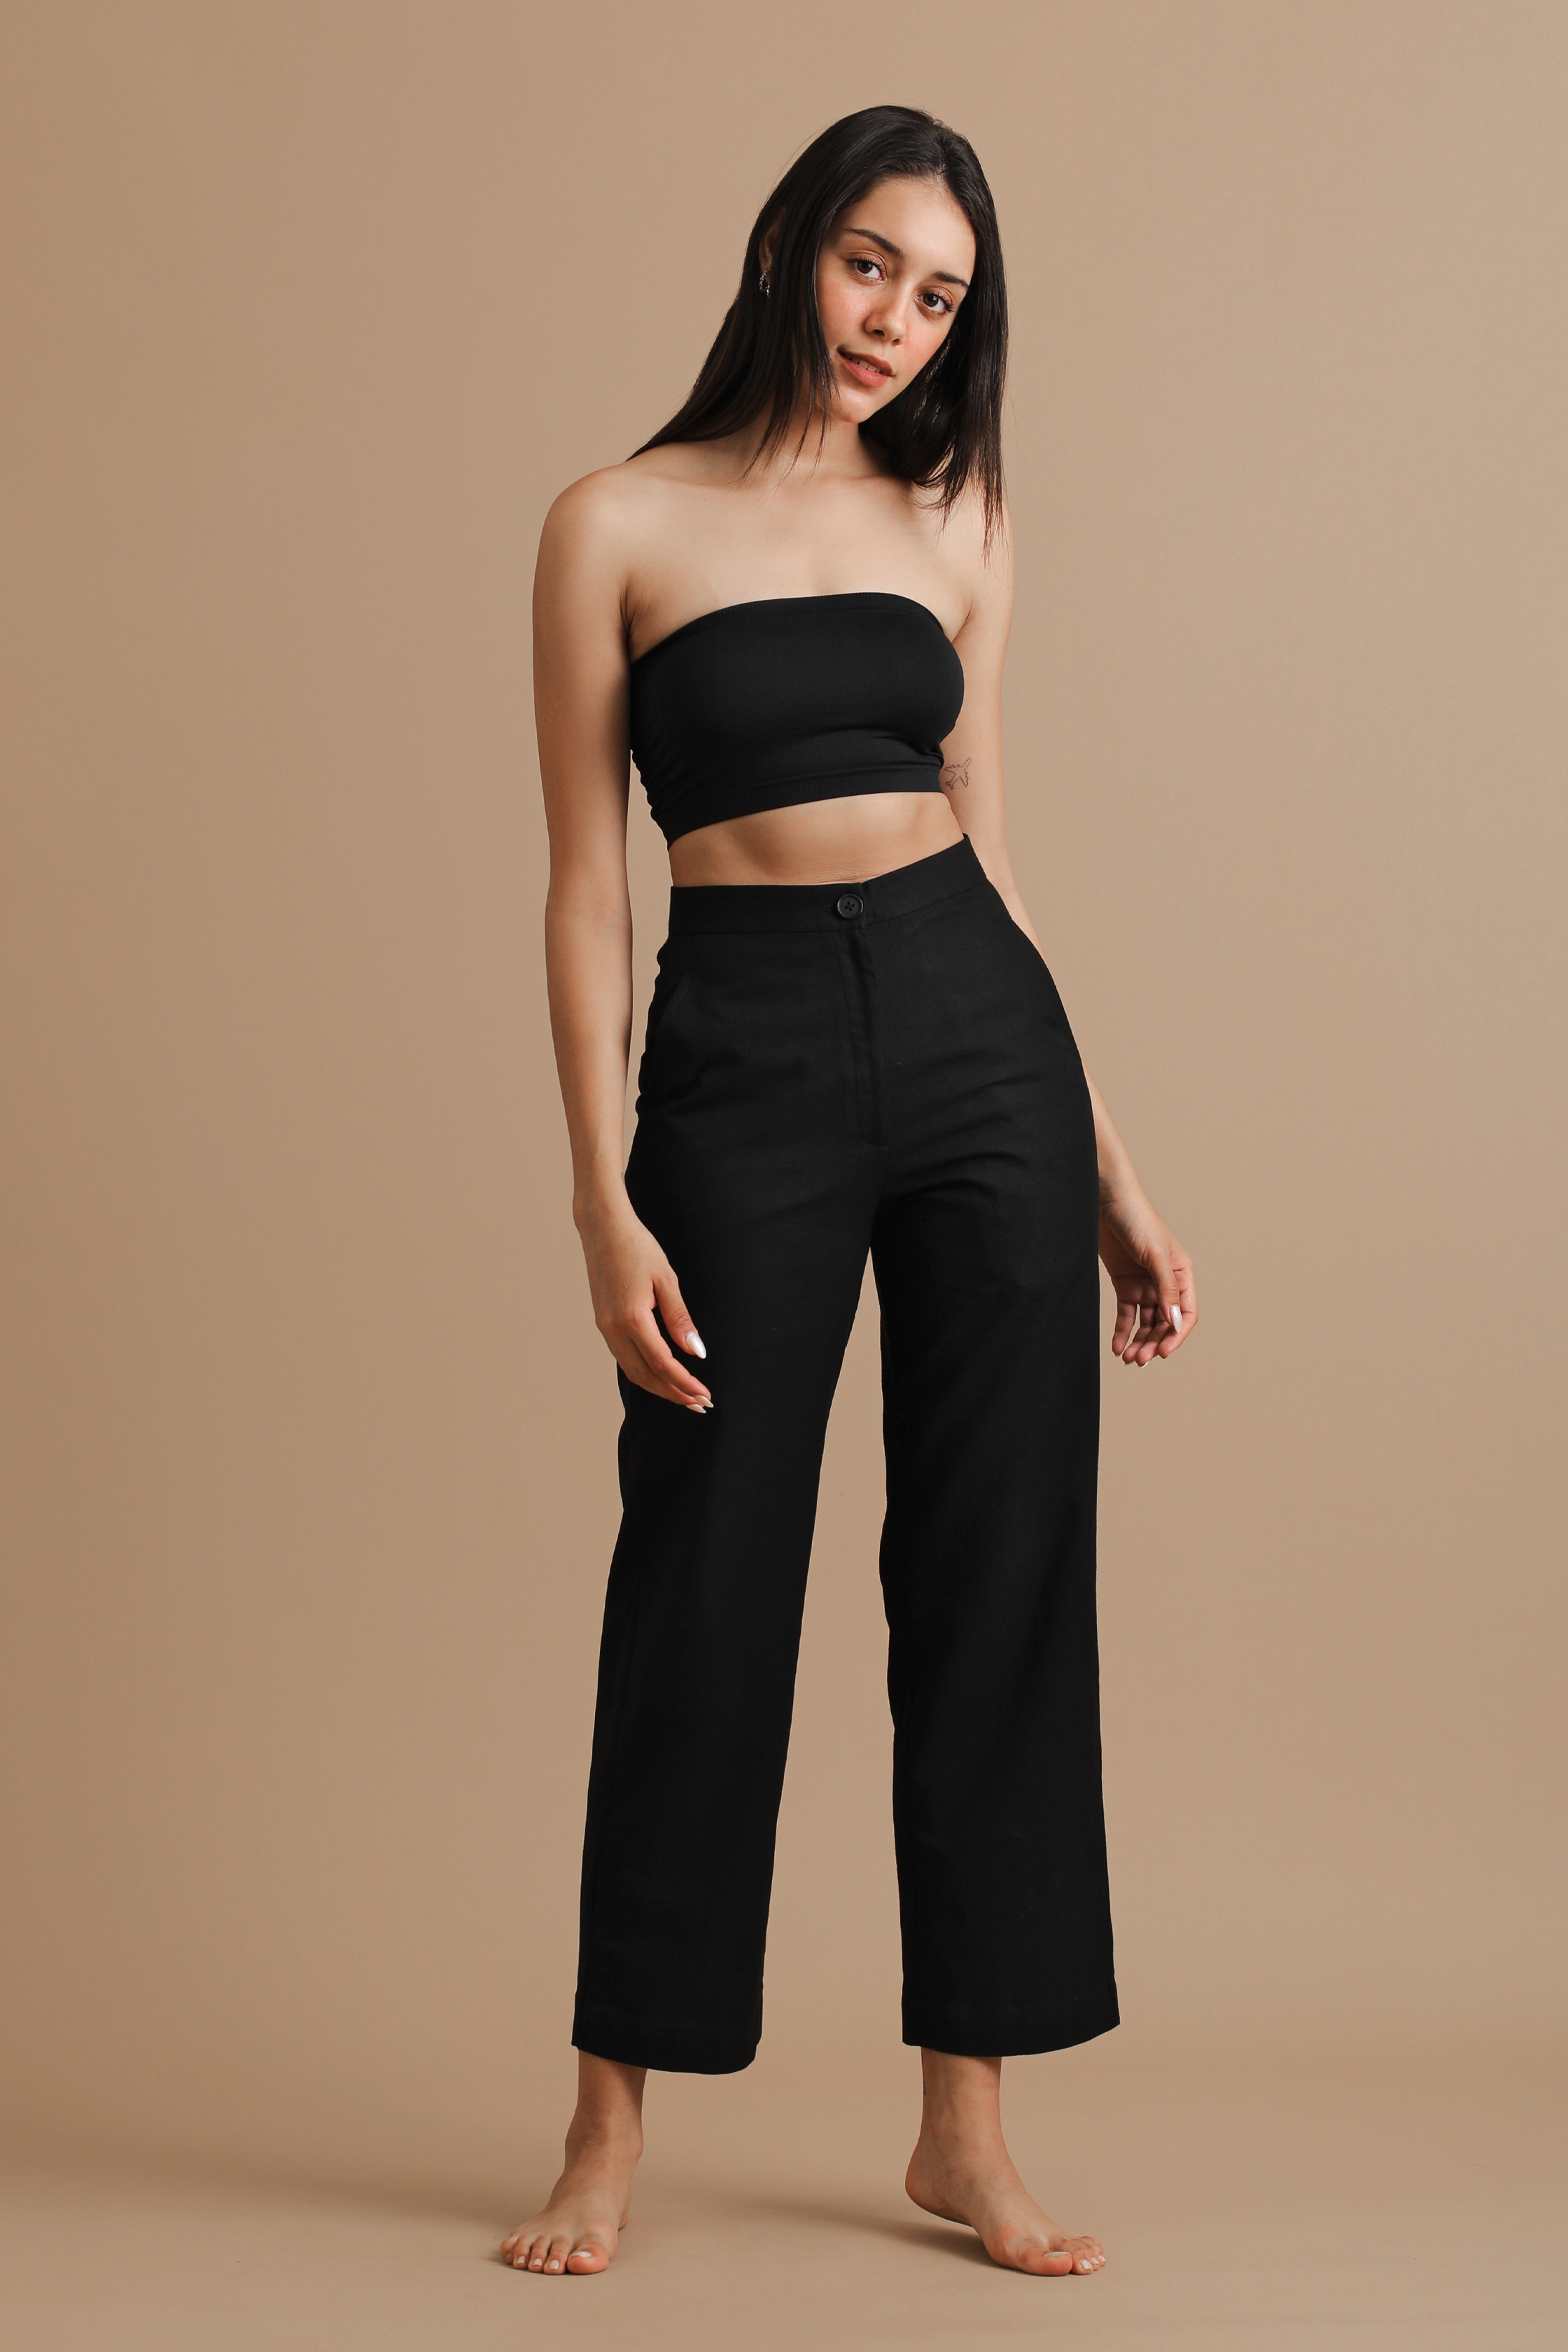 uNidraa | Yellow Crop Top paired with matching Cotton Pants